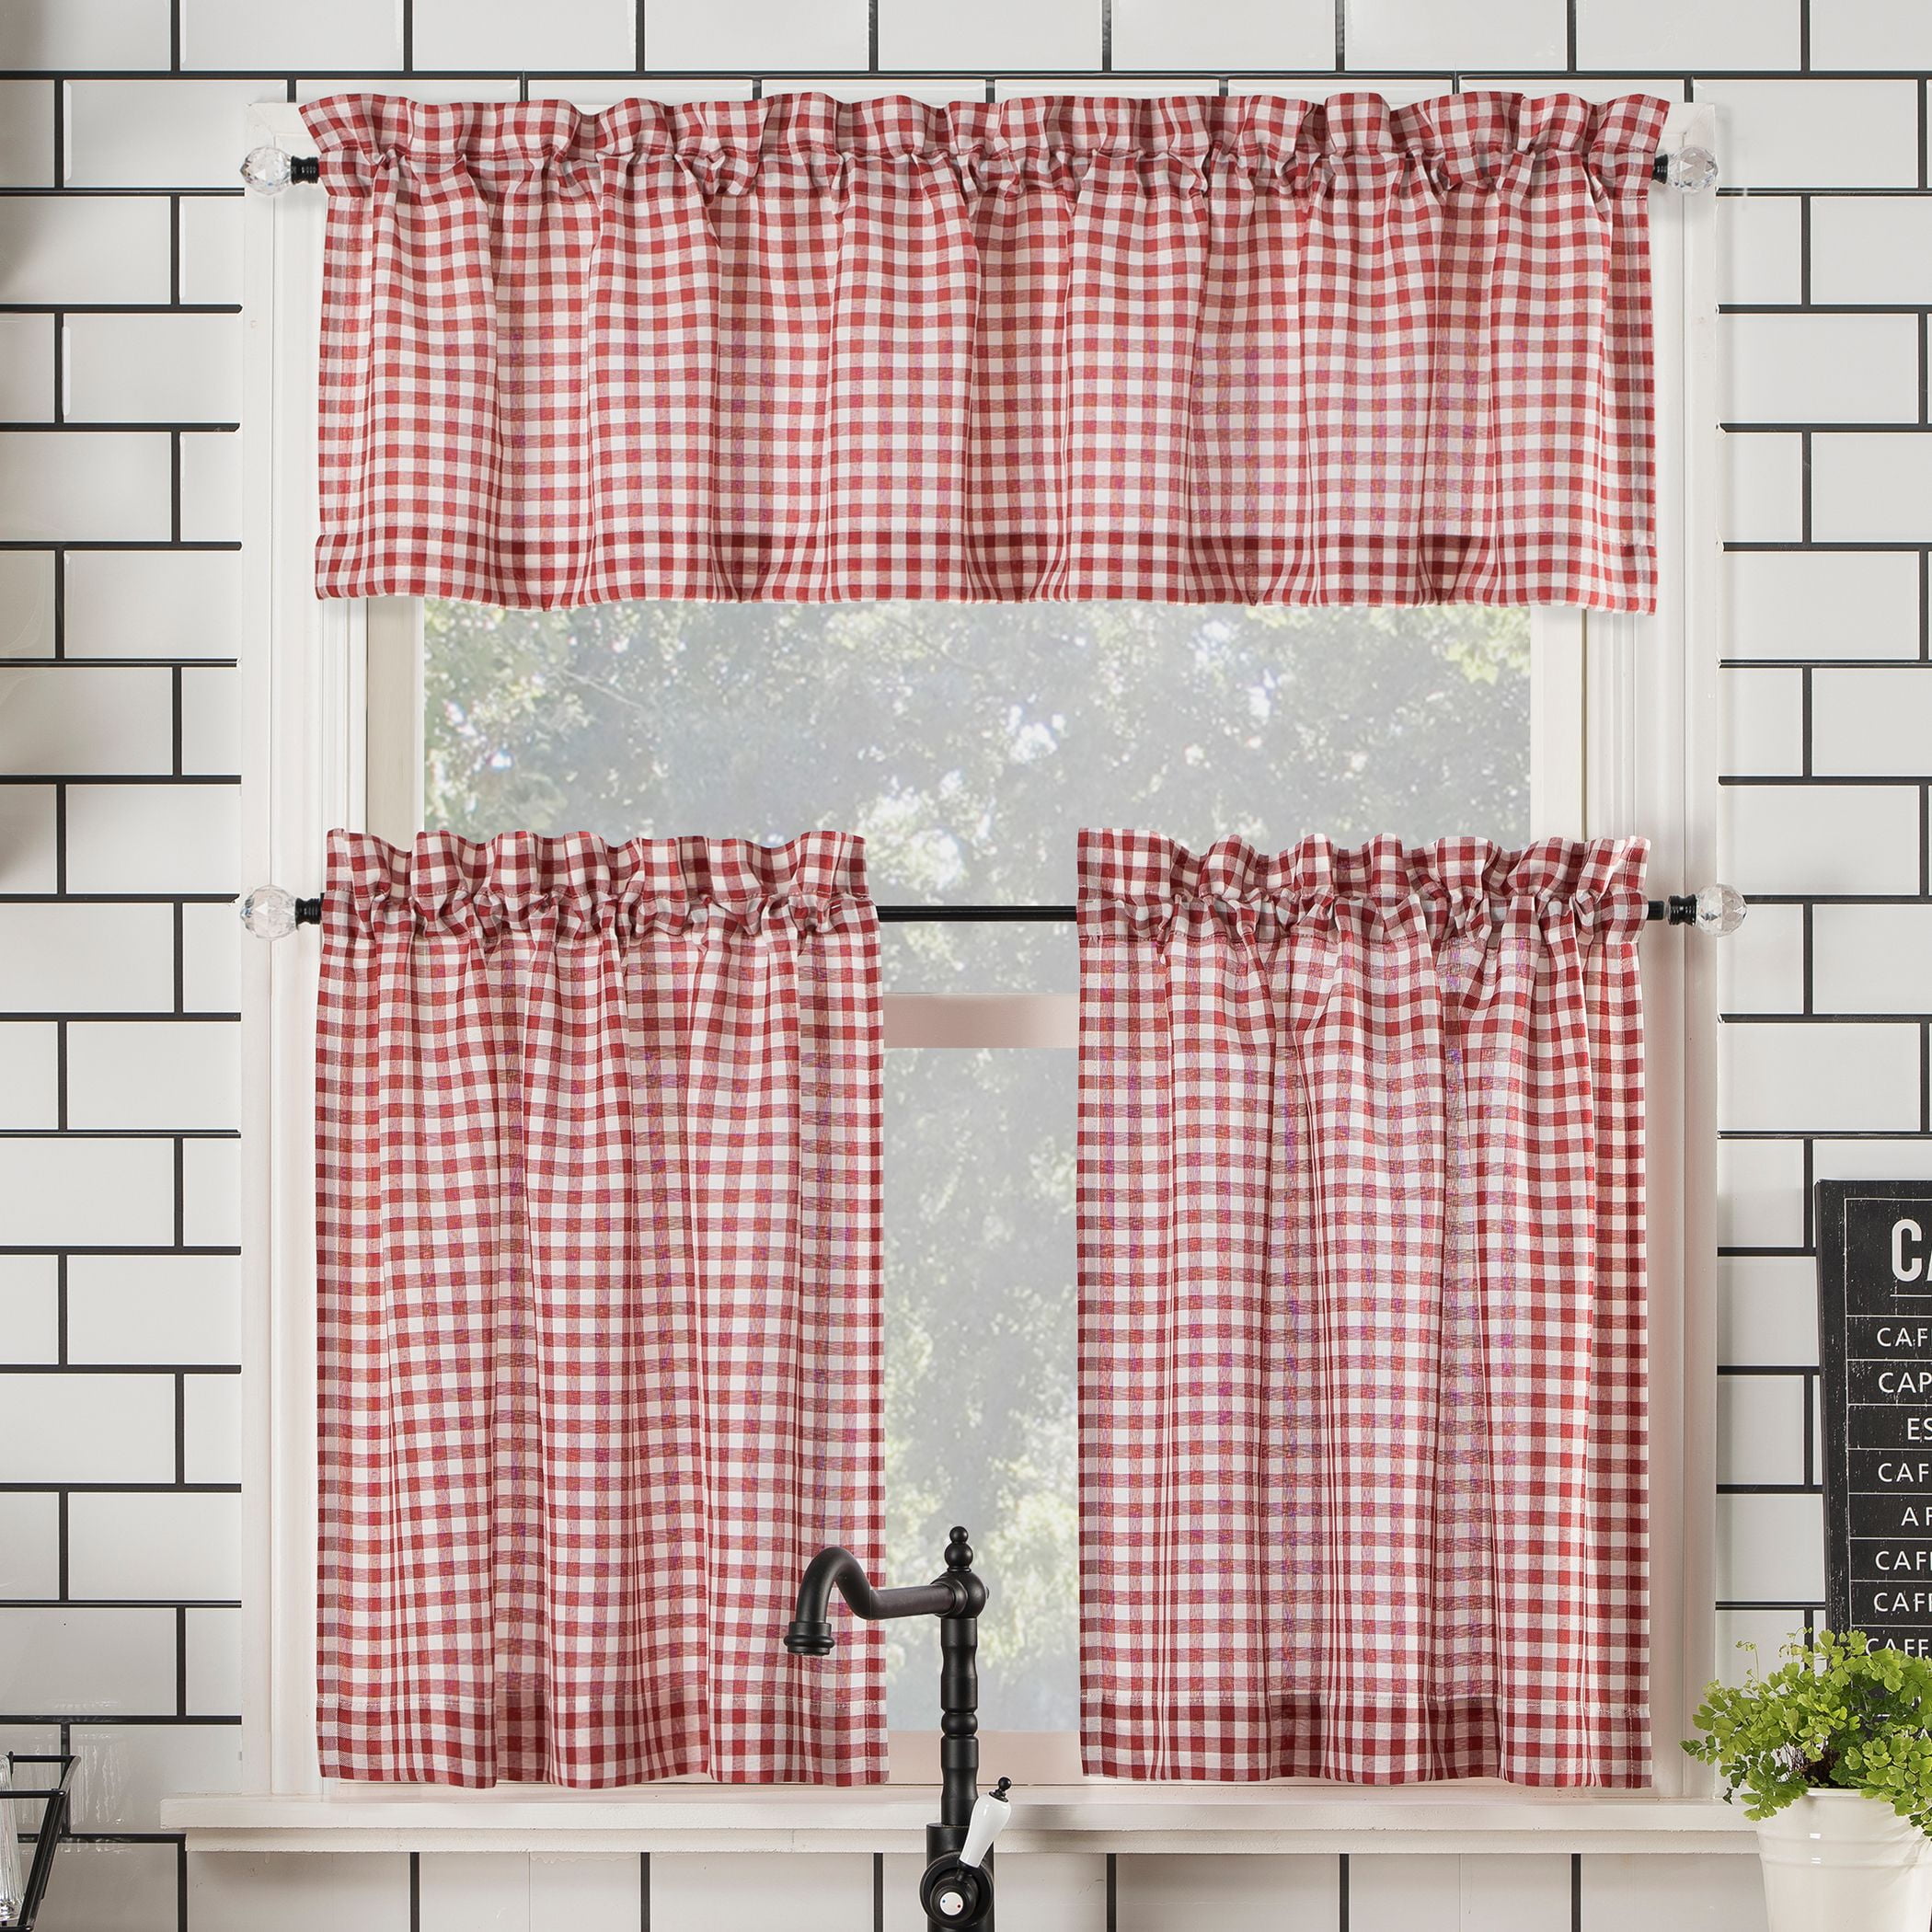 Country Checked Kitchen Window Curtain Valance Cafe Tier Curtain Short Panel 